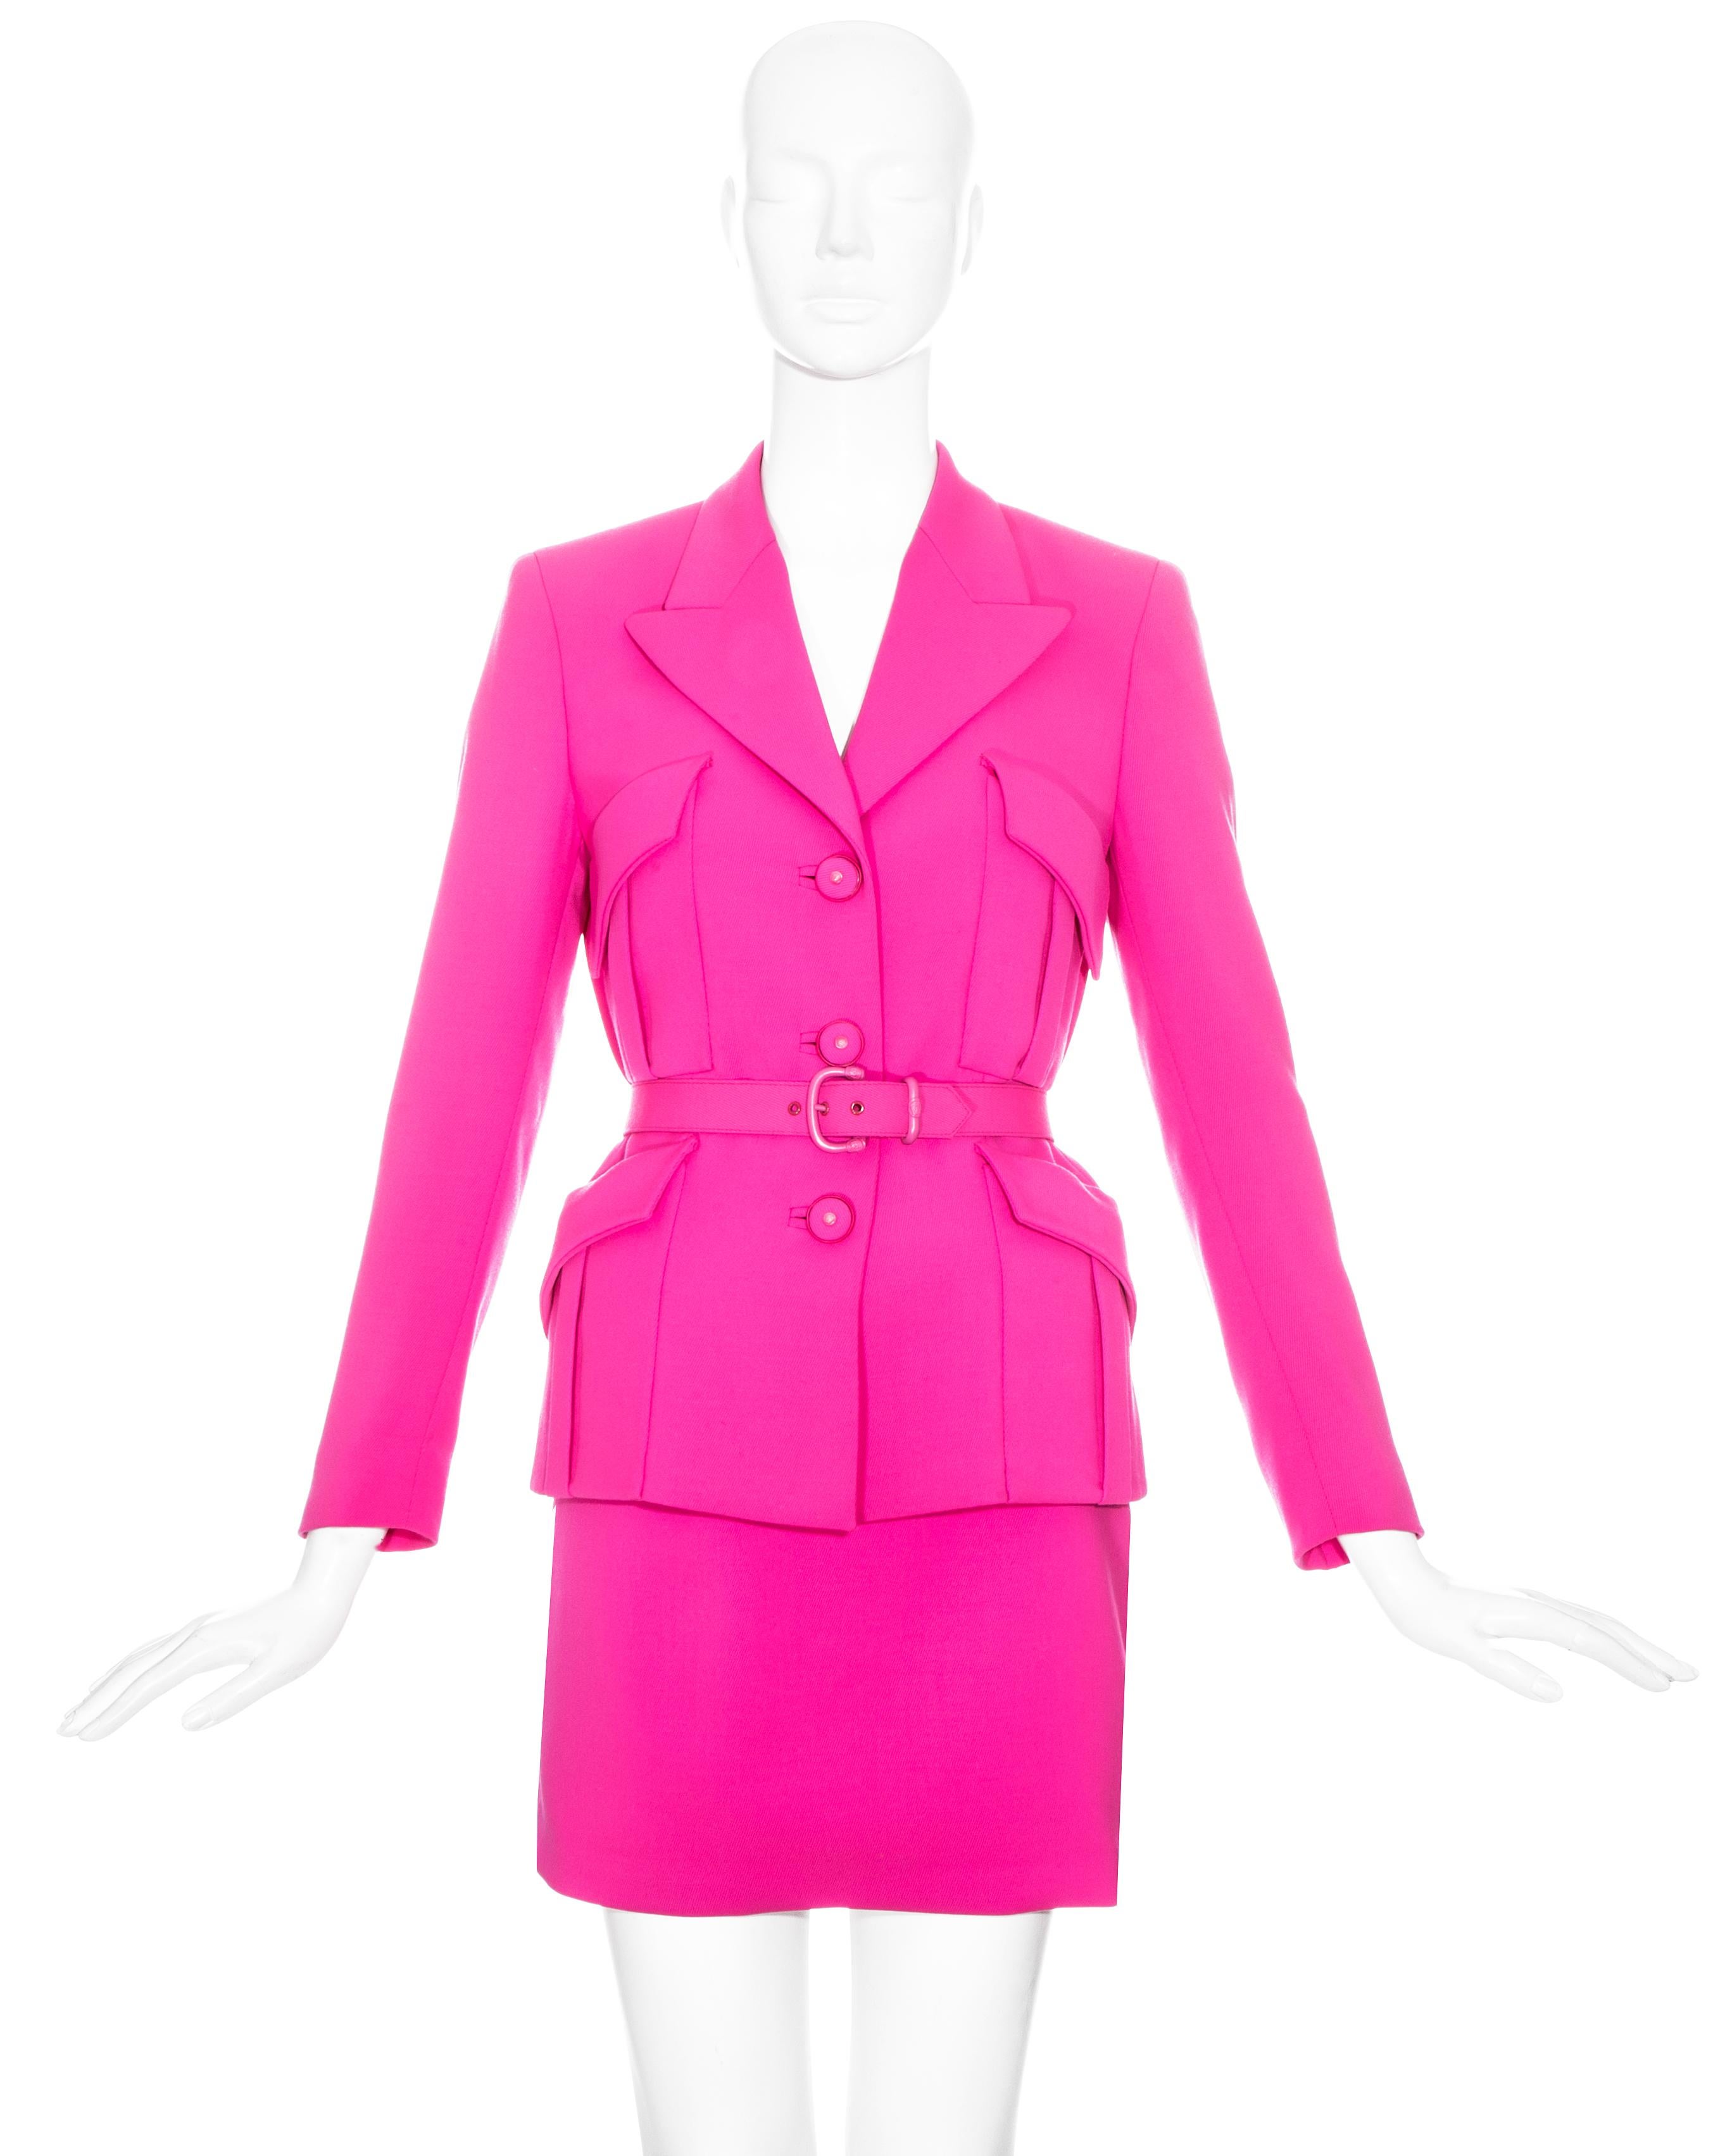 Gianni Versace neon pink wool skirt suit comprising: high waisted mini skirt, blazer jacket with four front flap pockets, large peak lapel, back vent, fabric covered Medusa buttons and matching waist belt with pink hardware. 

Fall-Winter 1996